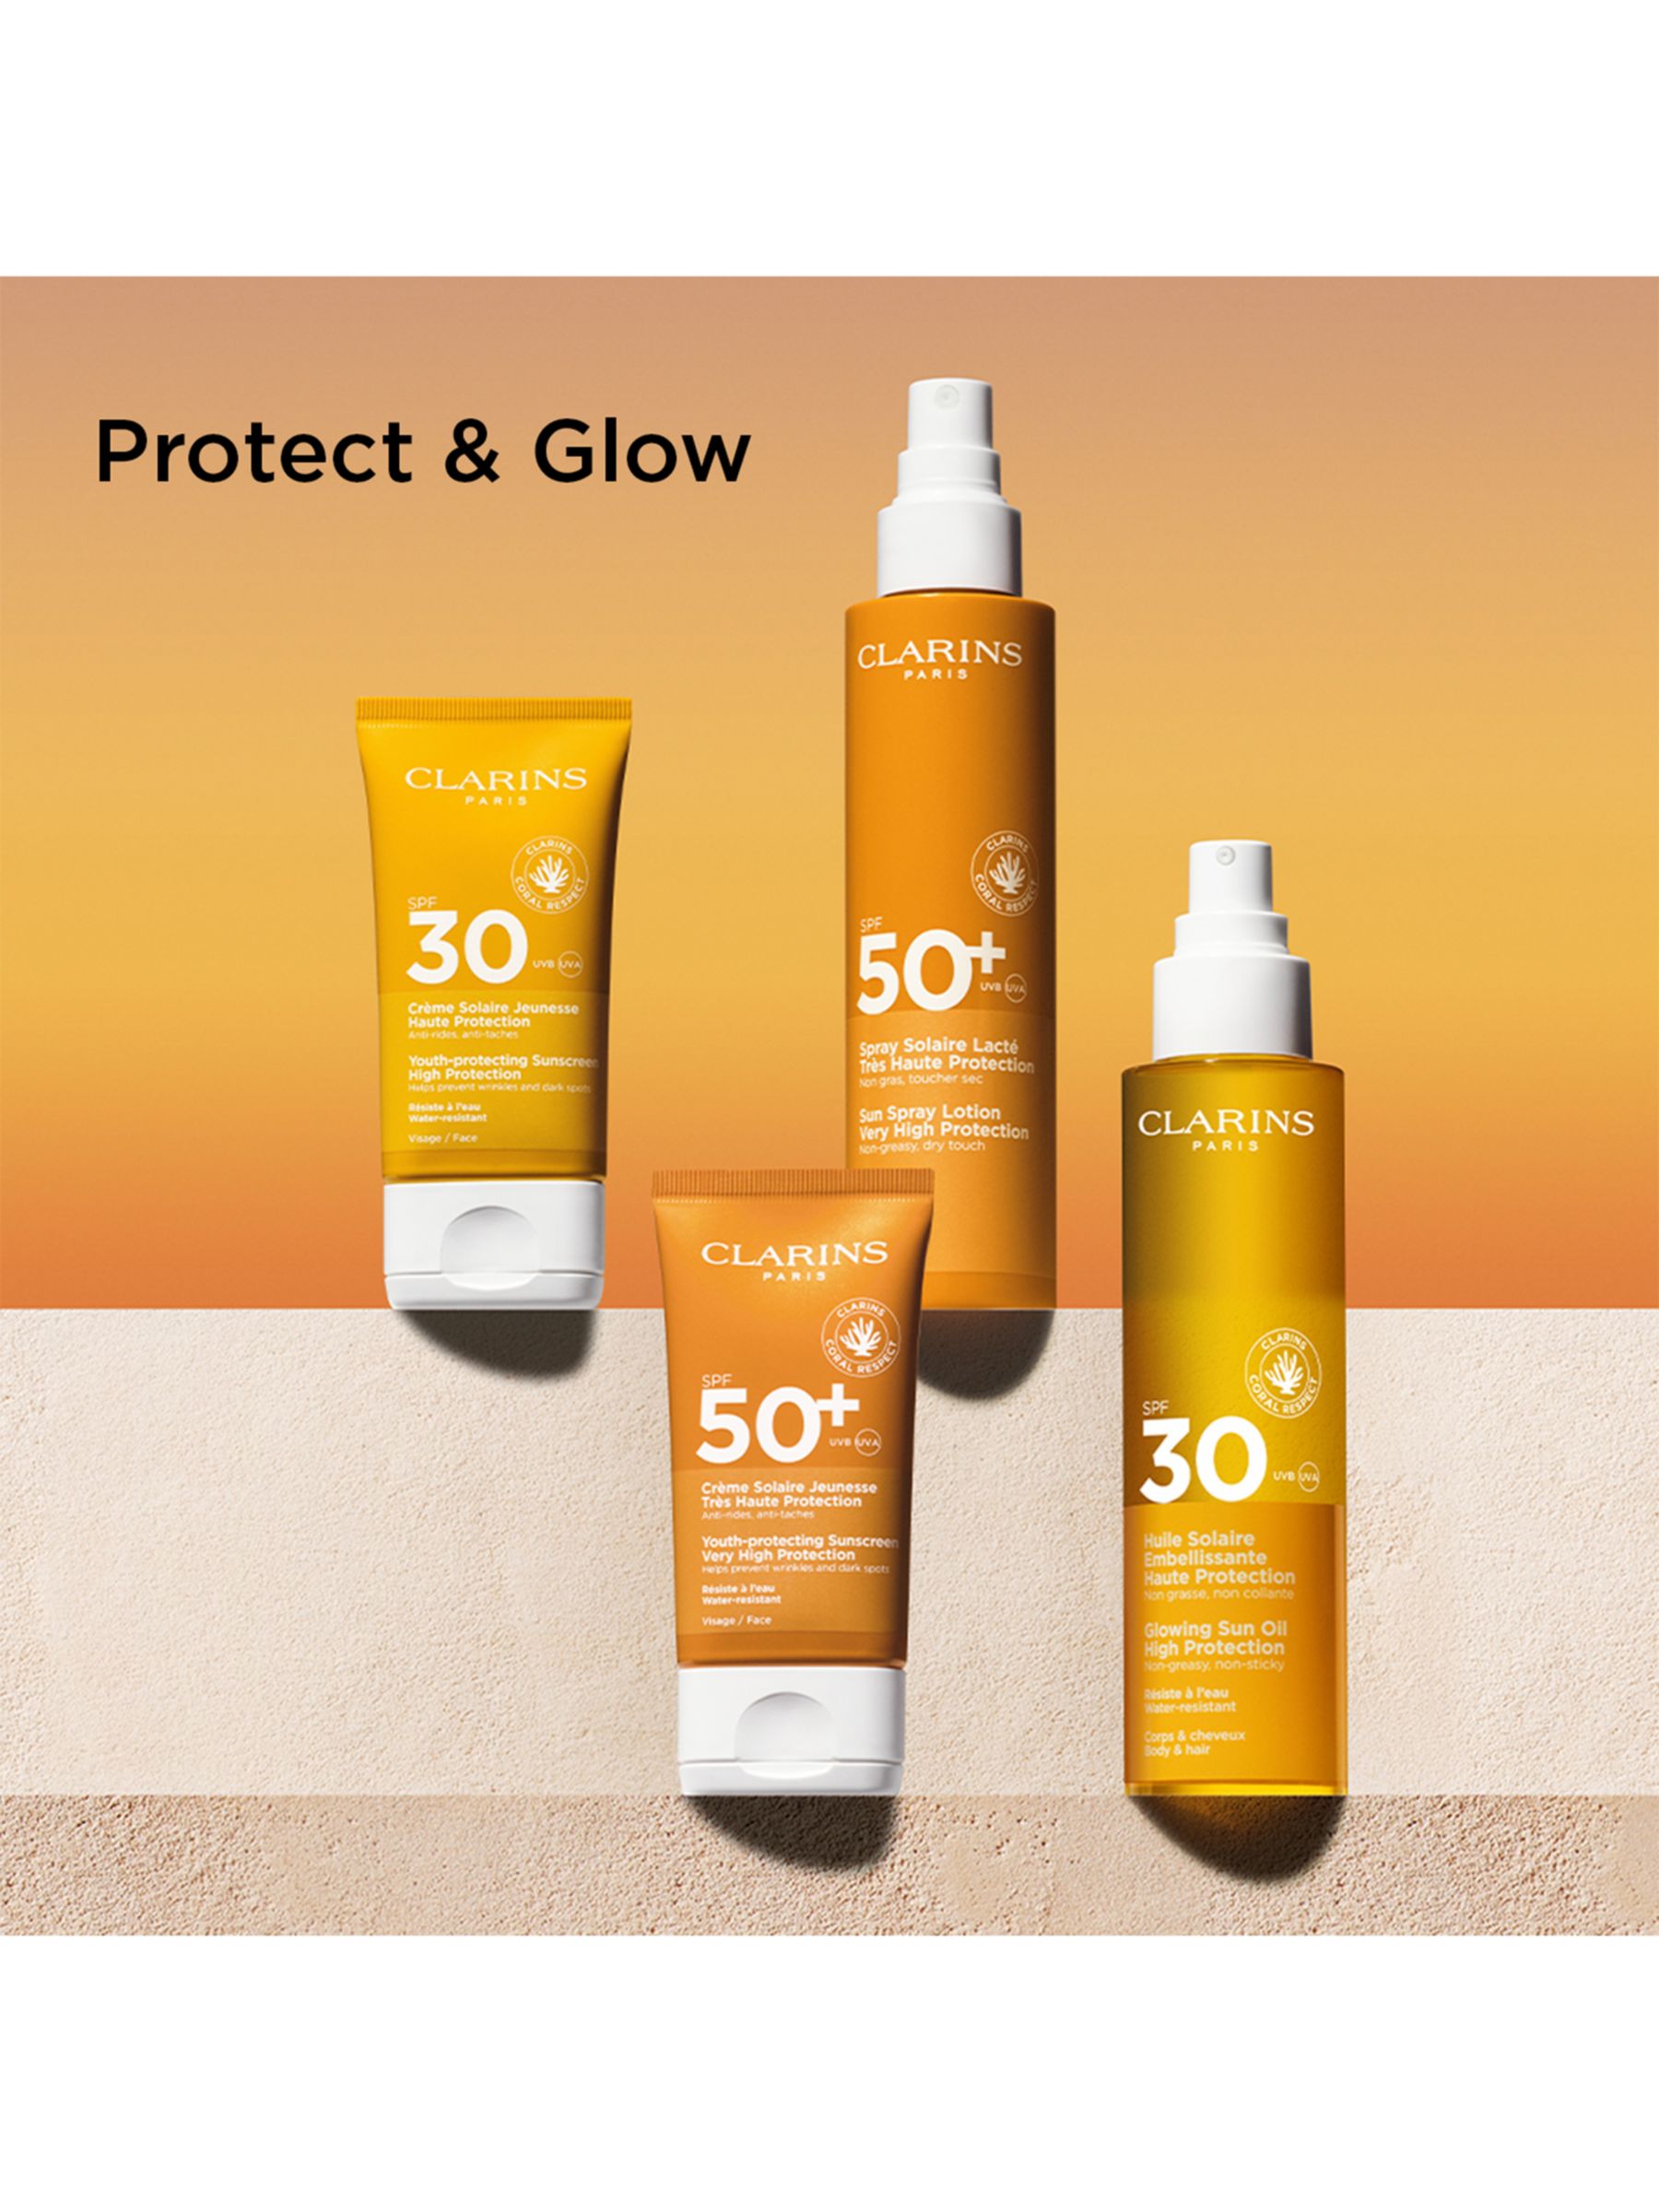 Clarins Glowing Sun Oil High Protection SPF 30, 150ml